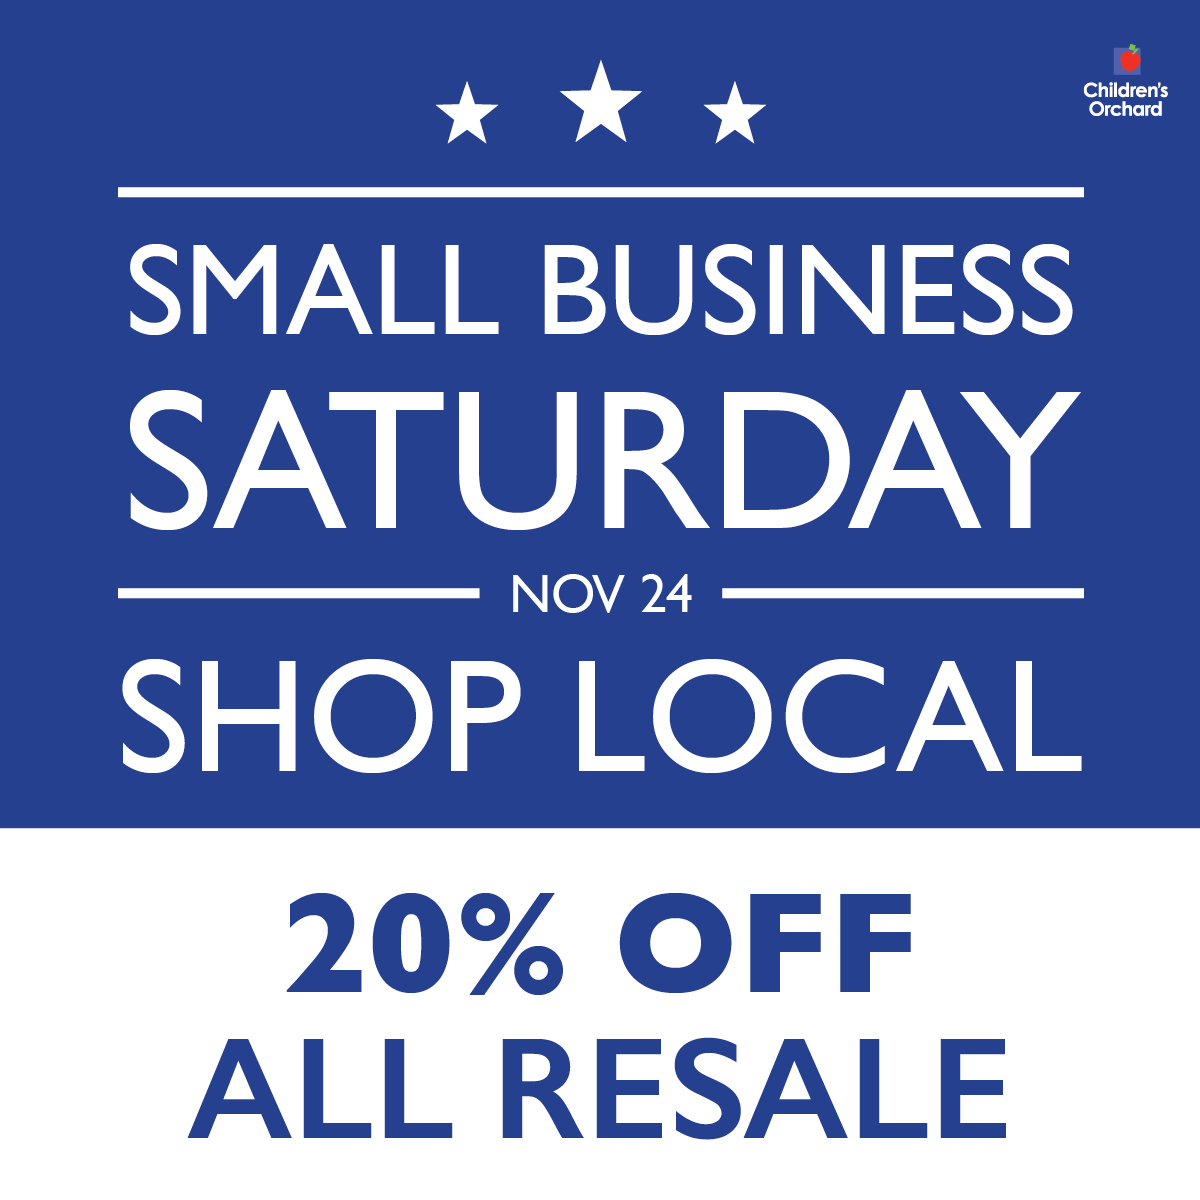 Small business Saturday. November 24. Shop Local. 20% off all resale.